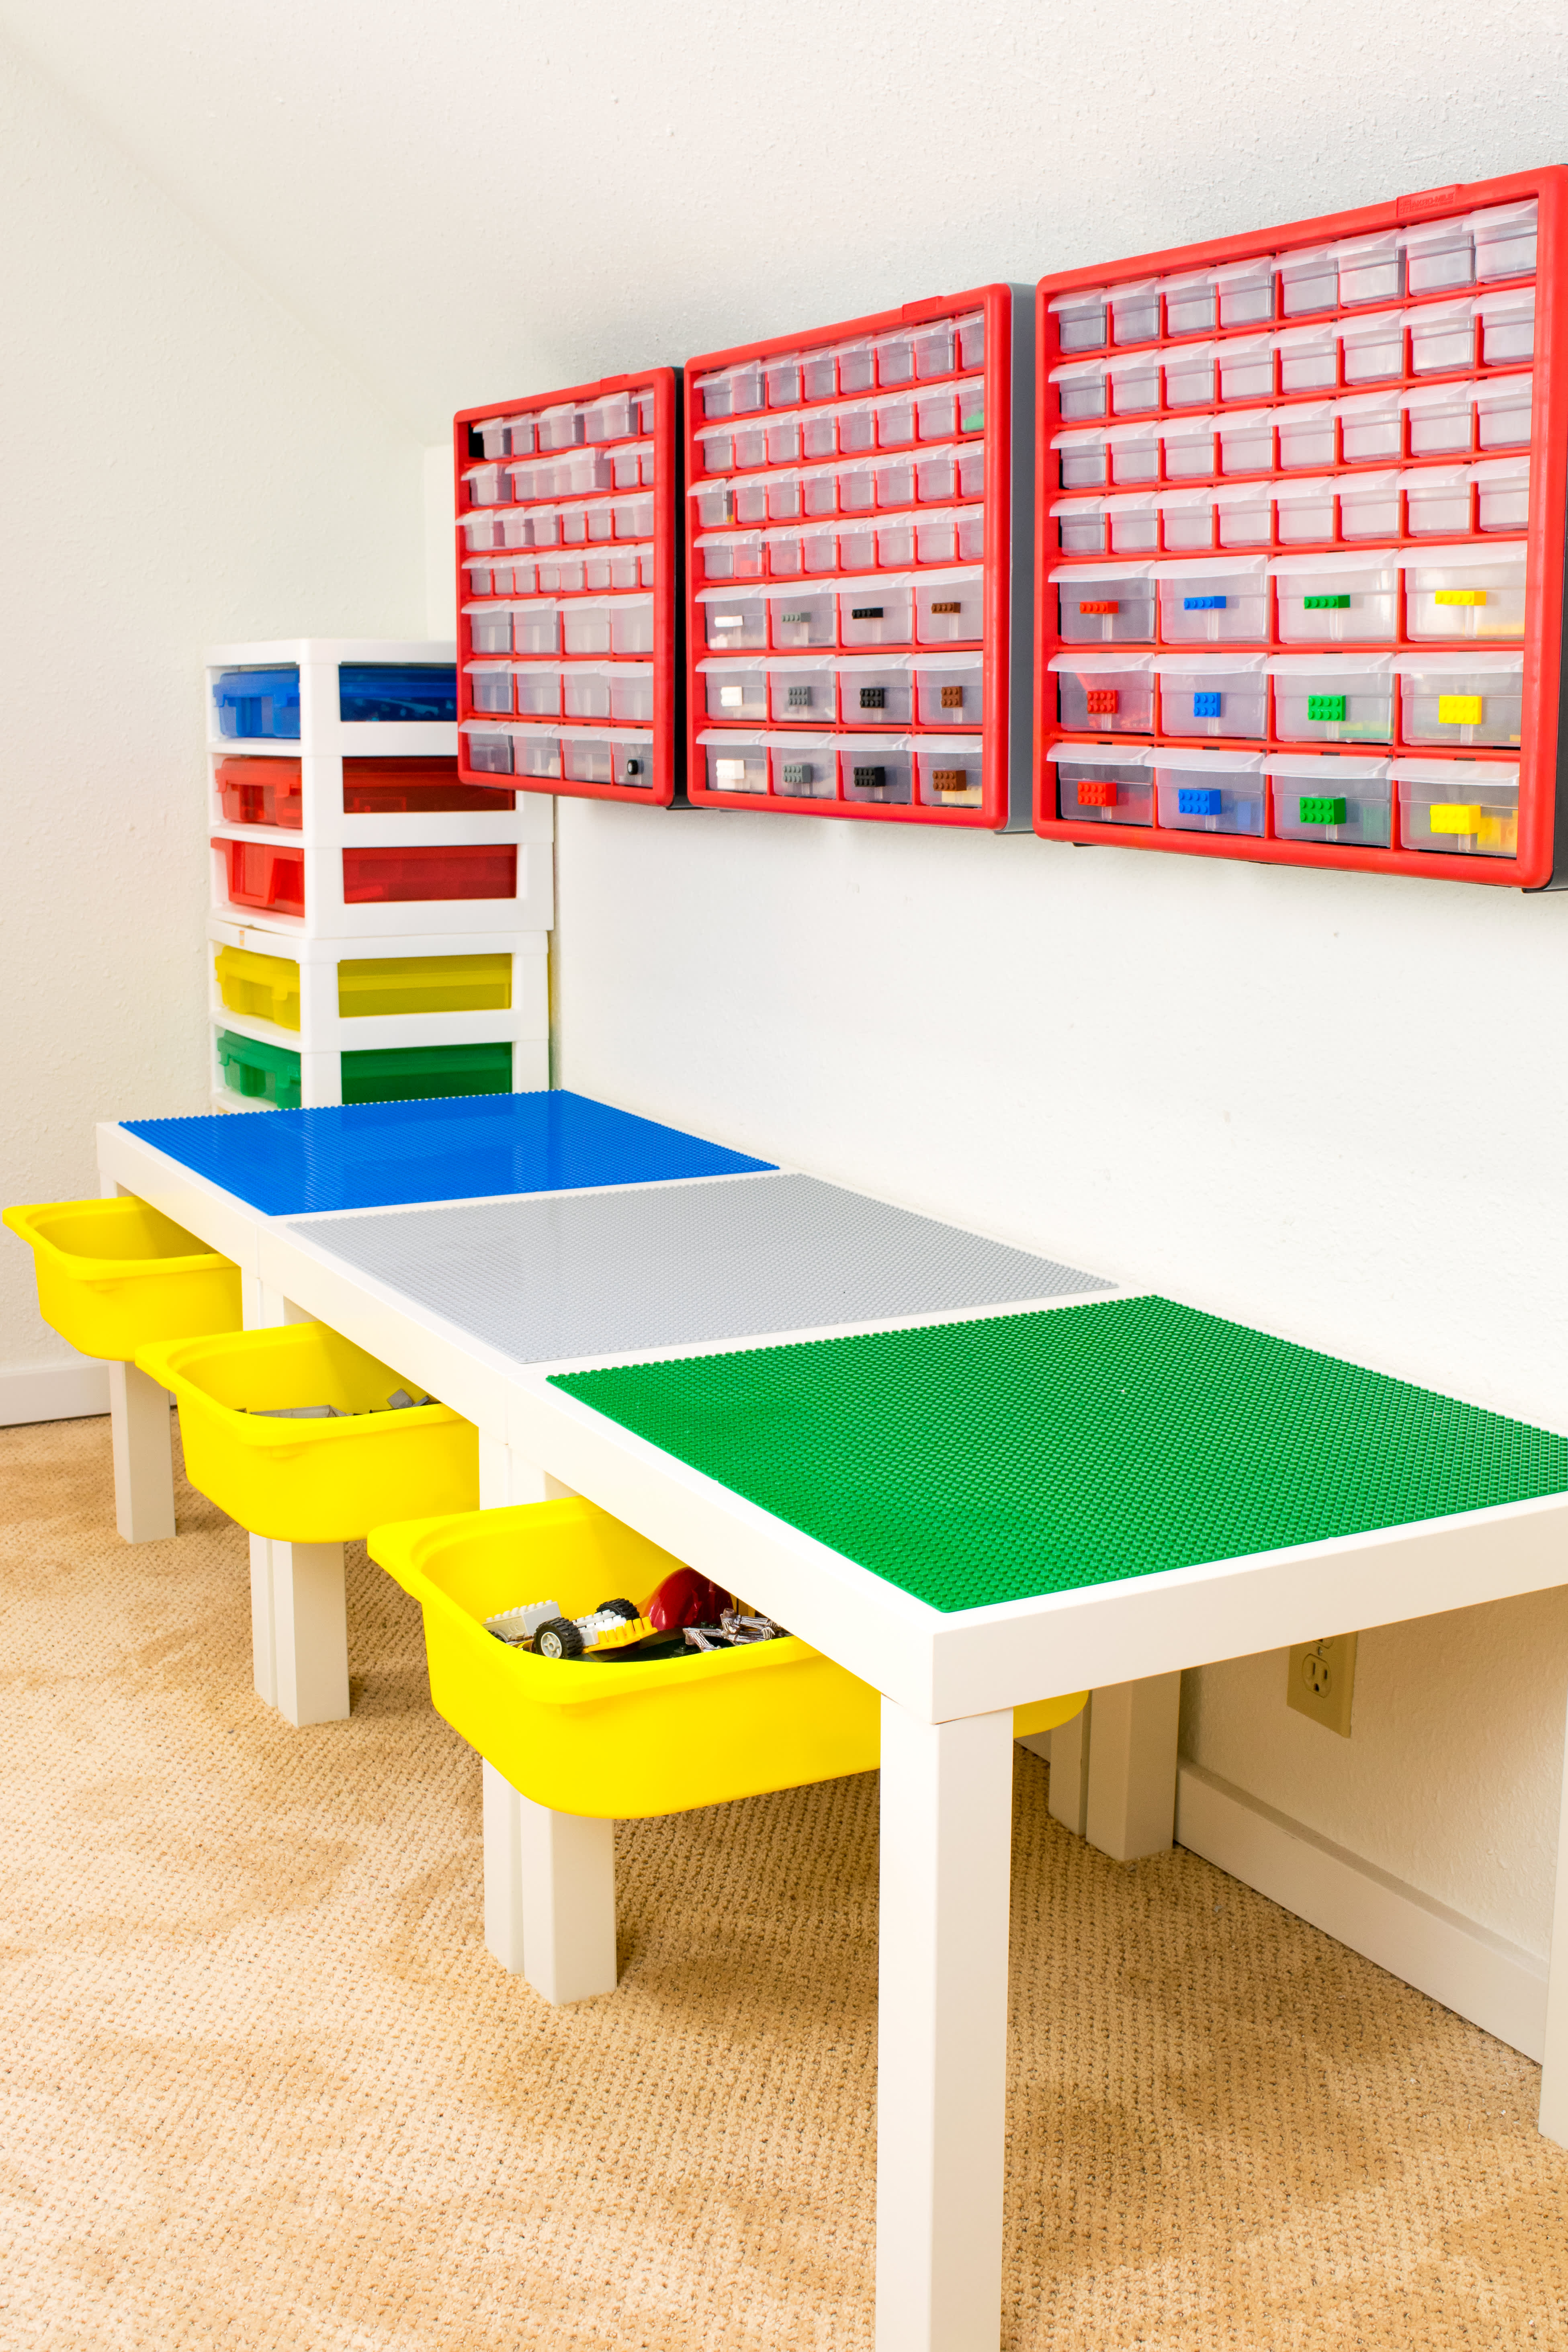 12 Lego Storage Ideas to Make Your Life So Much Easier - PureWow